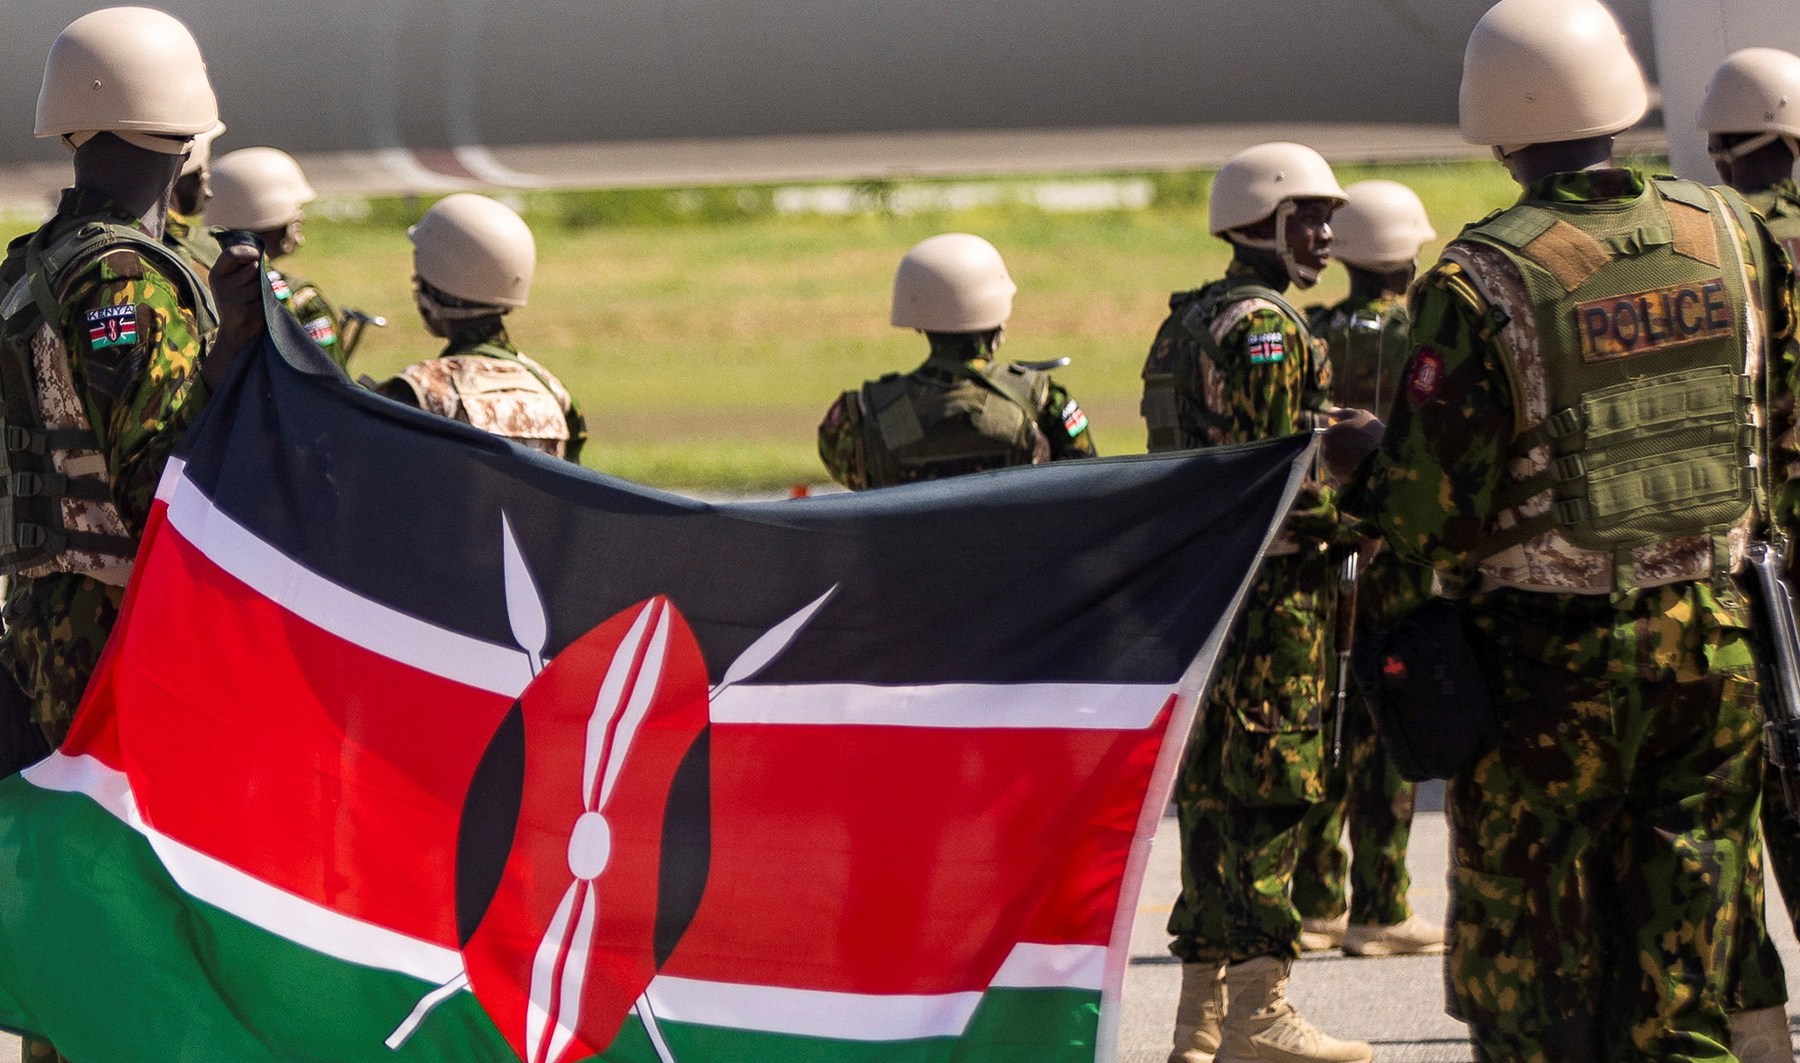 Video: Kenyan police arrive for Haiti security mission against gangs